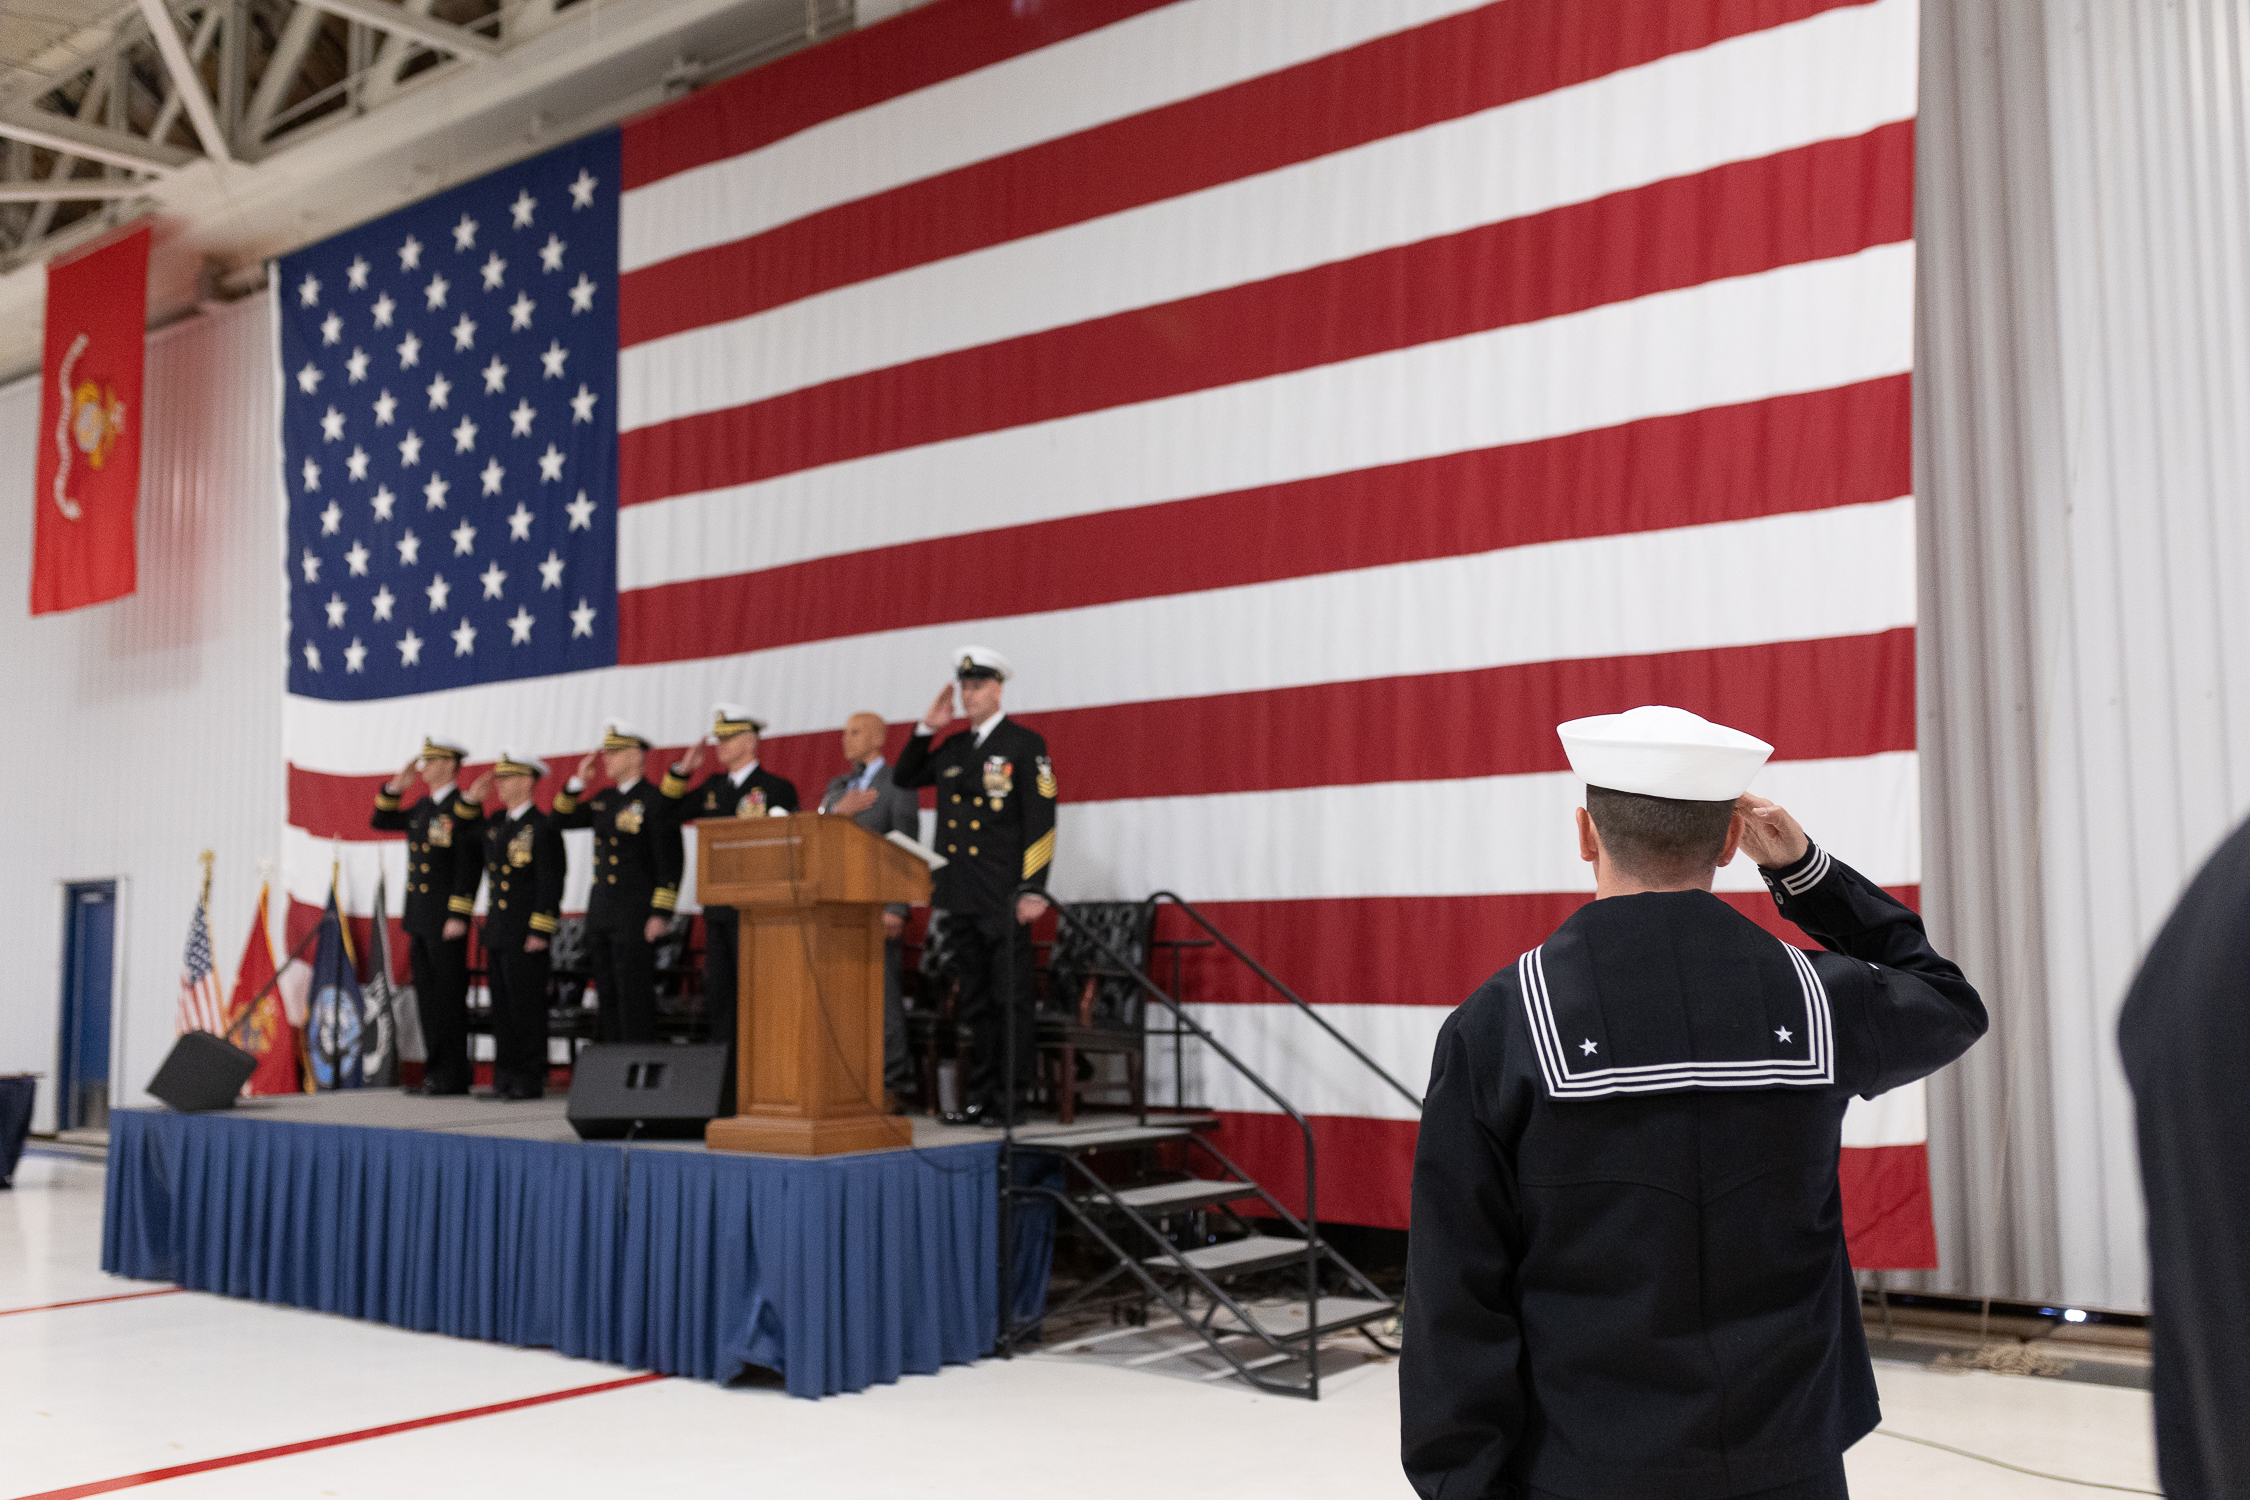 Navy change of command ceremony at oceana naval air station inside hangar by alison bell photographer virginia beach